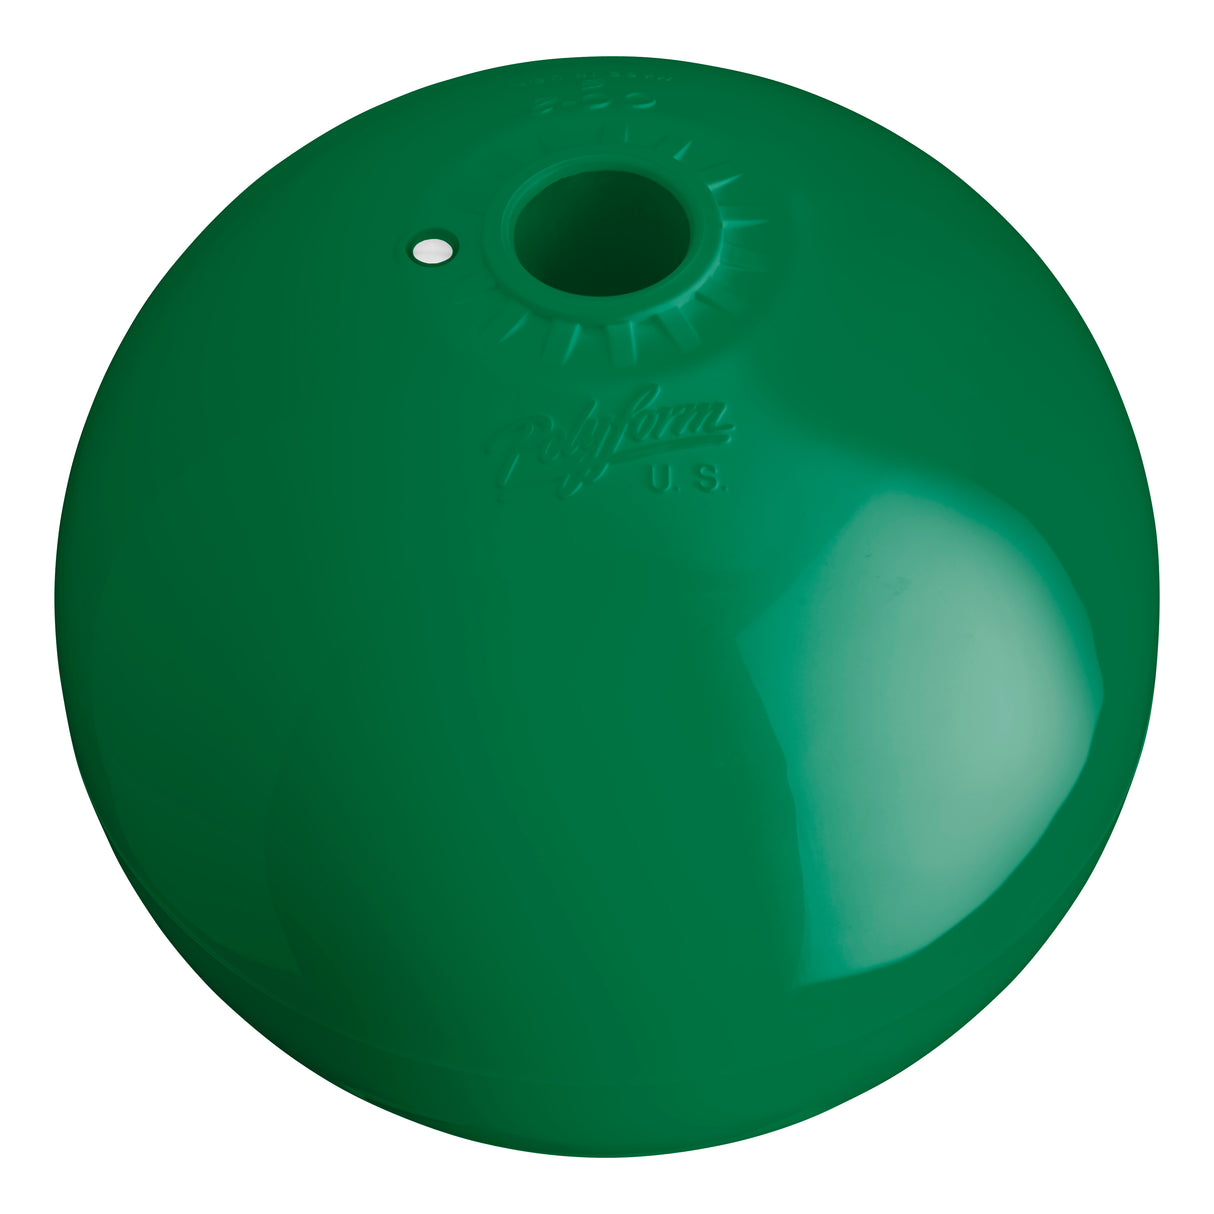 Hole through center mooring and marker buoy, Polyform CC-2 Forest Green angled shot